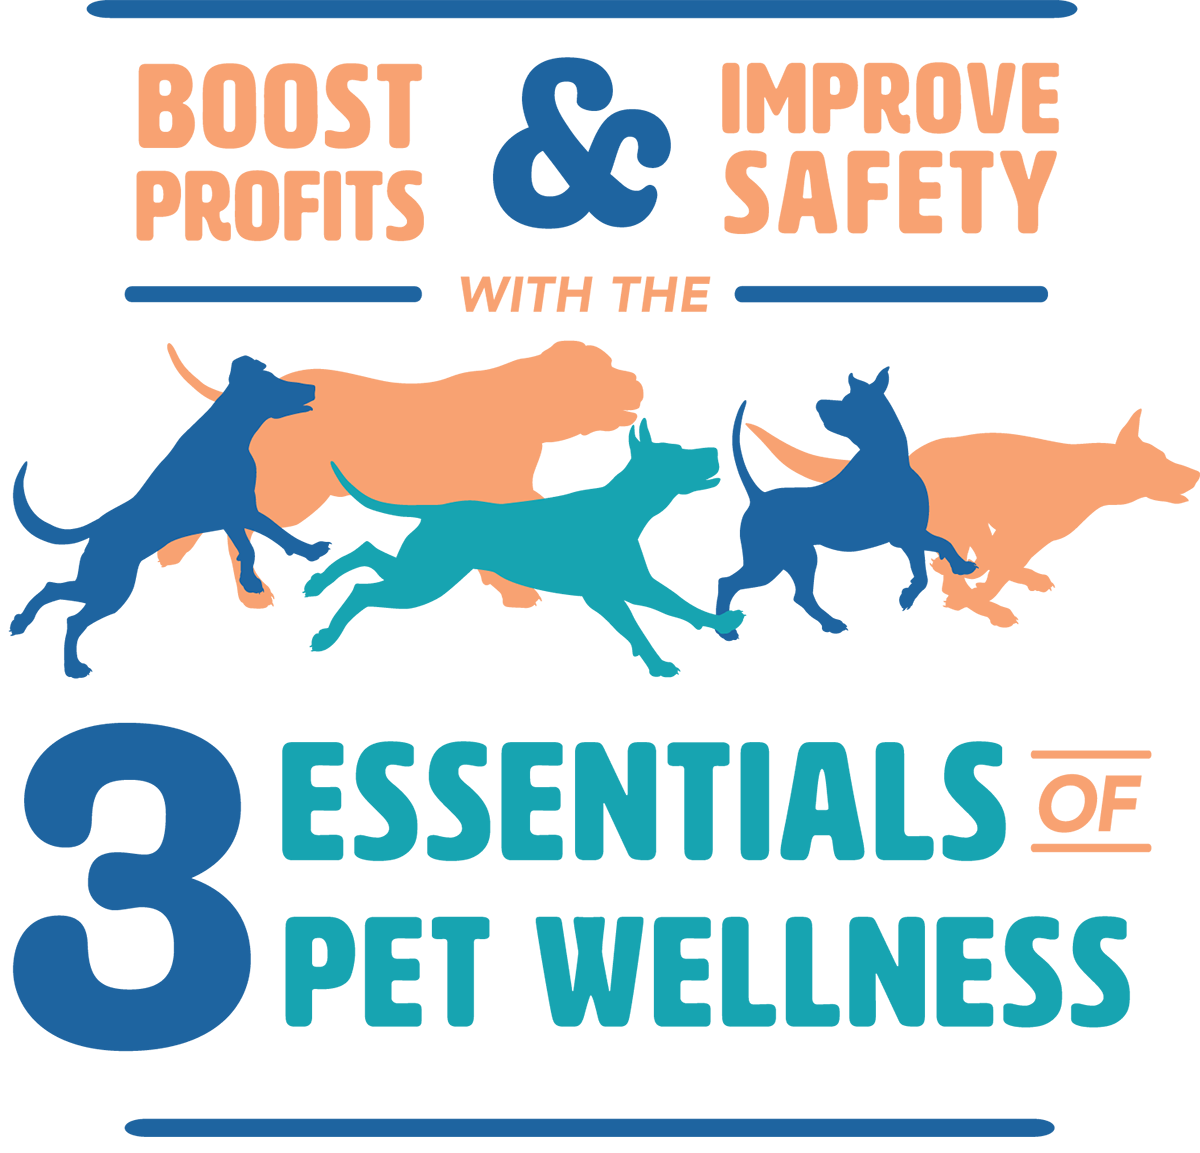 Boost Profits & Improve Safety with the 3 Essentials of Pet Wellness typographic title in shades of orange, dark blue, and turquoise with five different dog size illustrative silhouettes in shades of dark blue, orange, and turquoise